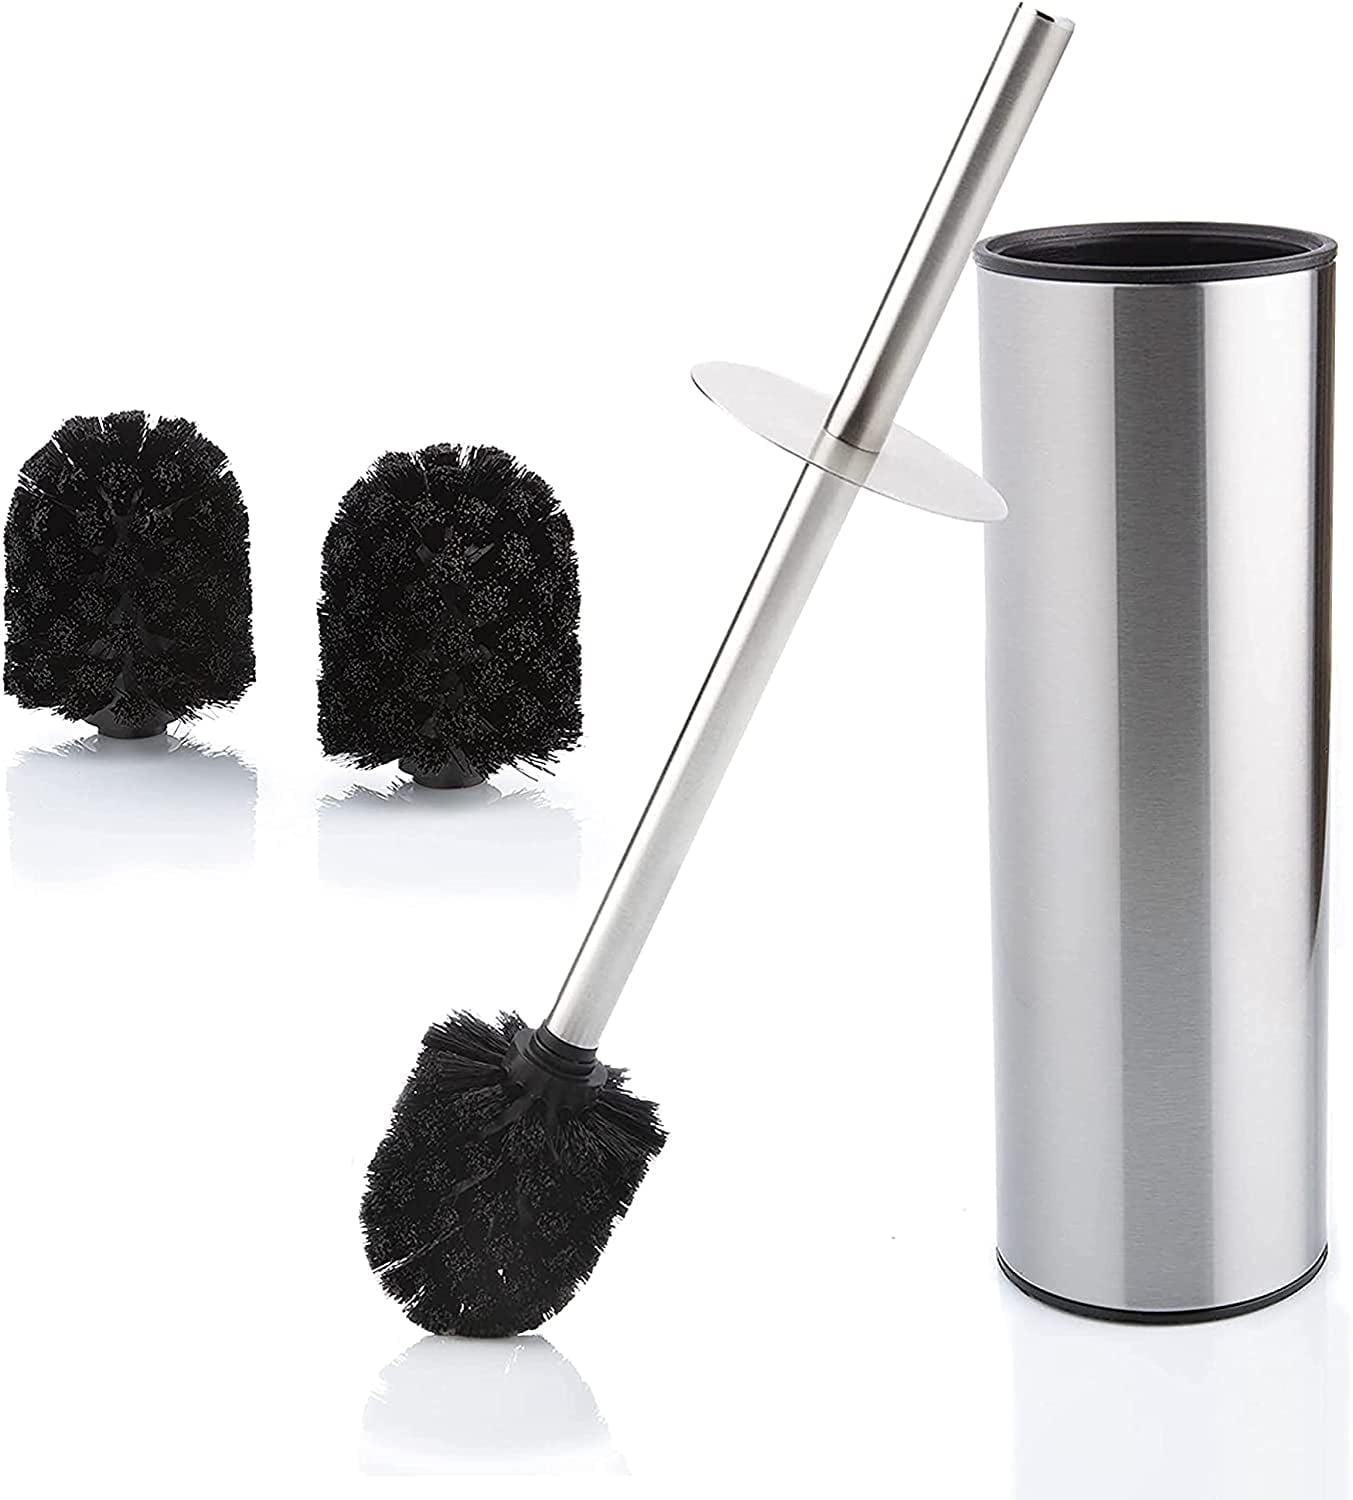 STAINLESS STEEL TOILET BRUSH AND HOLDER FREE STANDING BATHROOM BRUSH 3 COLOR NEW 